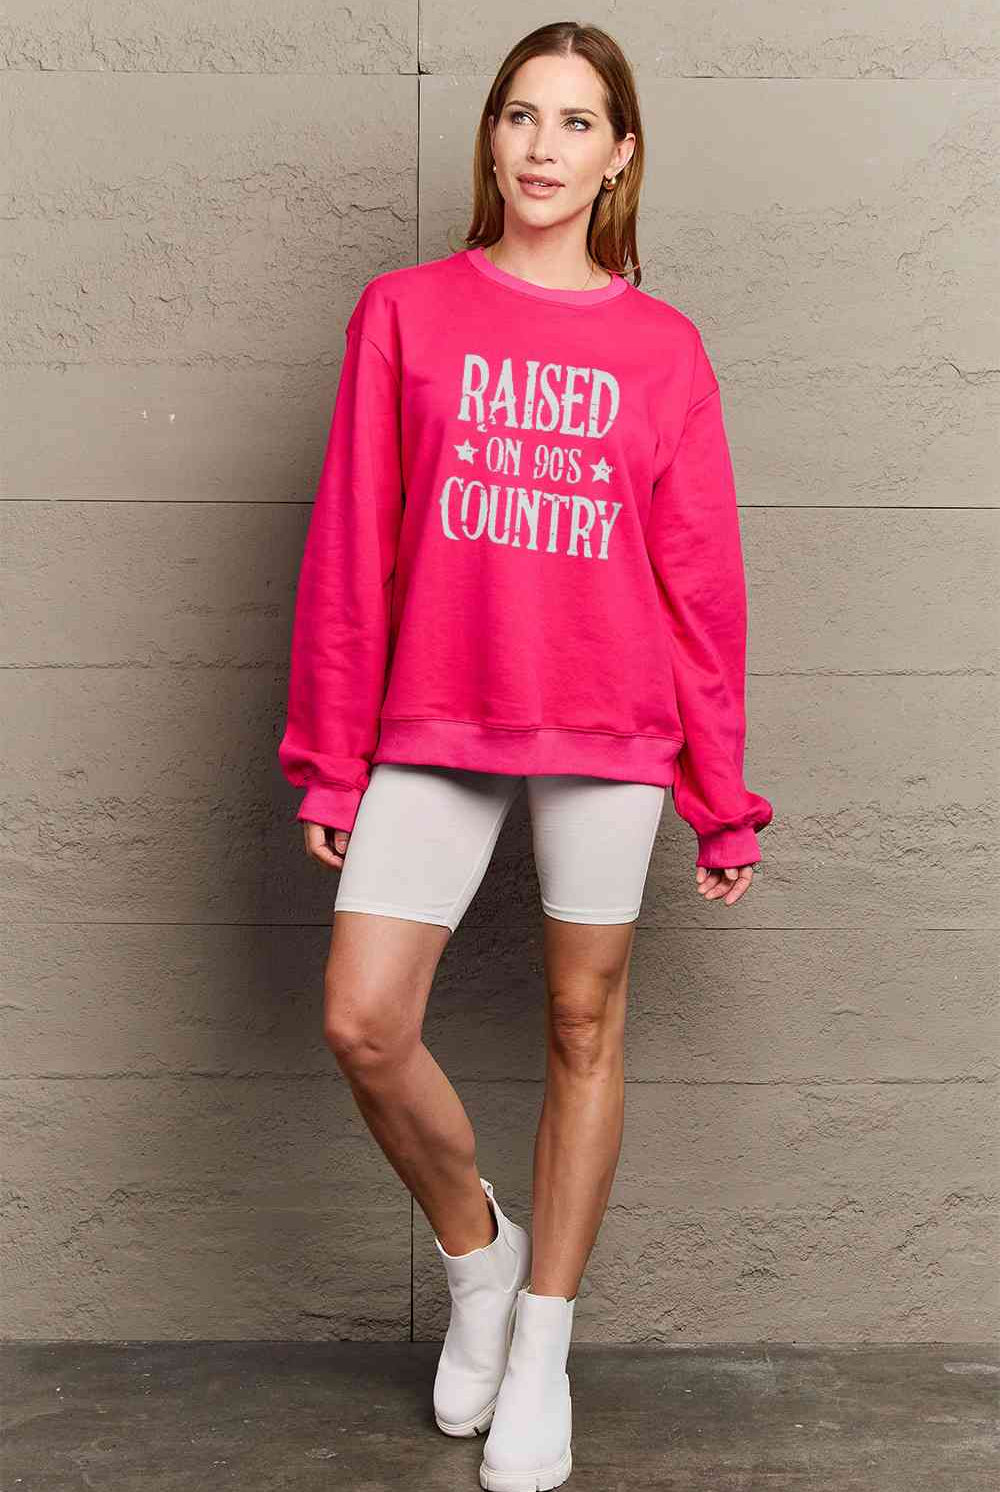 Simply Love Full Size RAISED ON 90'S COUNTRY Graphic Sweatshirt - GemThreads Boutique